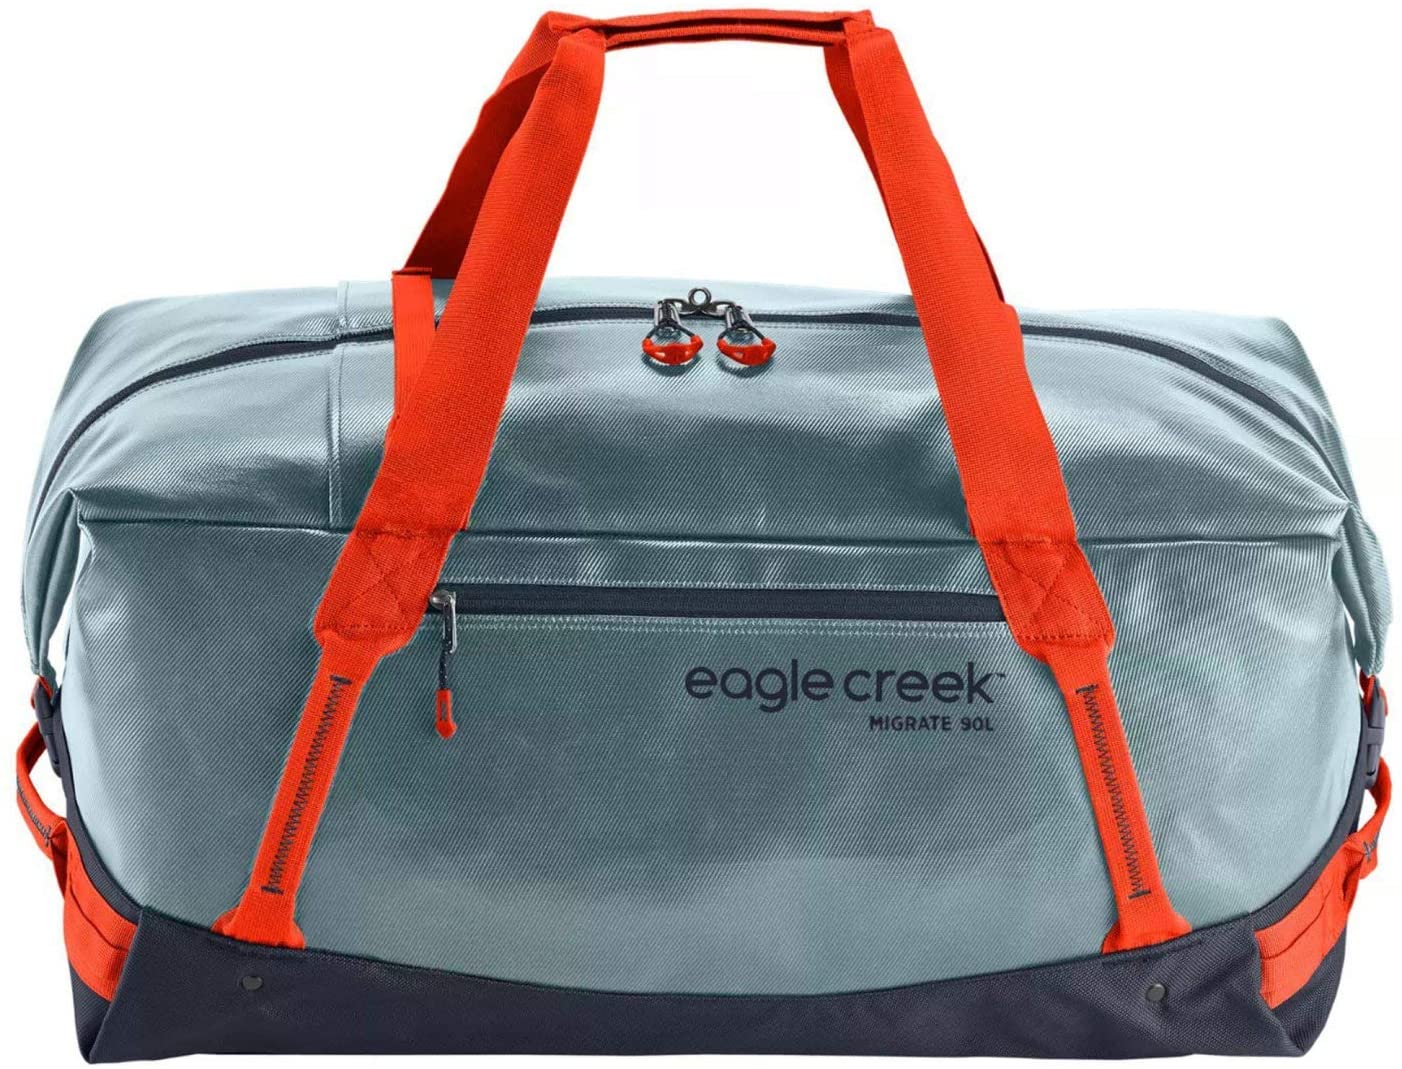 Eagle Creek Migrate Duffel 90 Liters in Biwa Lake Blue color from the front